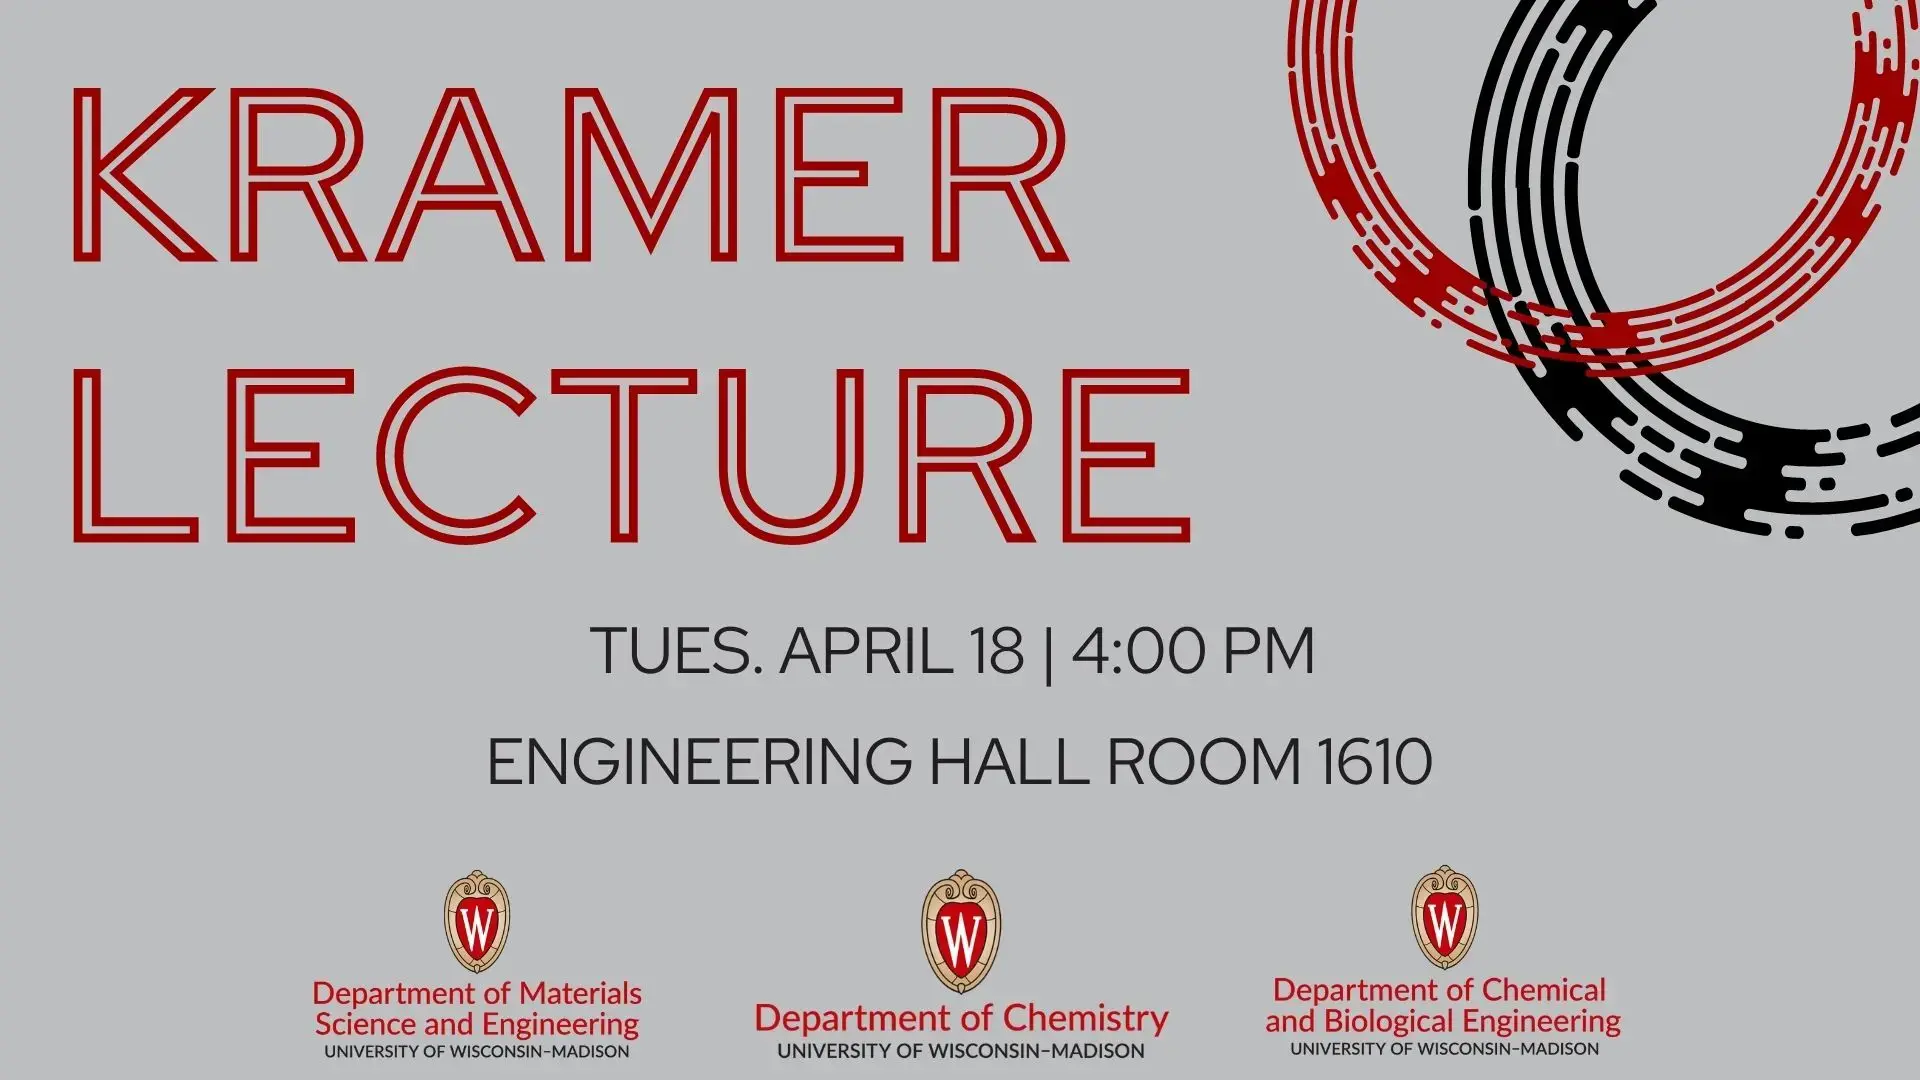 Kramer Lecture_2023-04-18 at 4:00p_EHall 1610